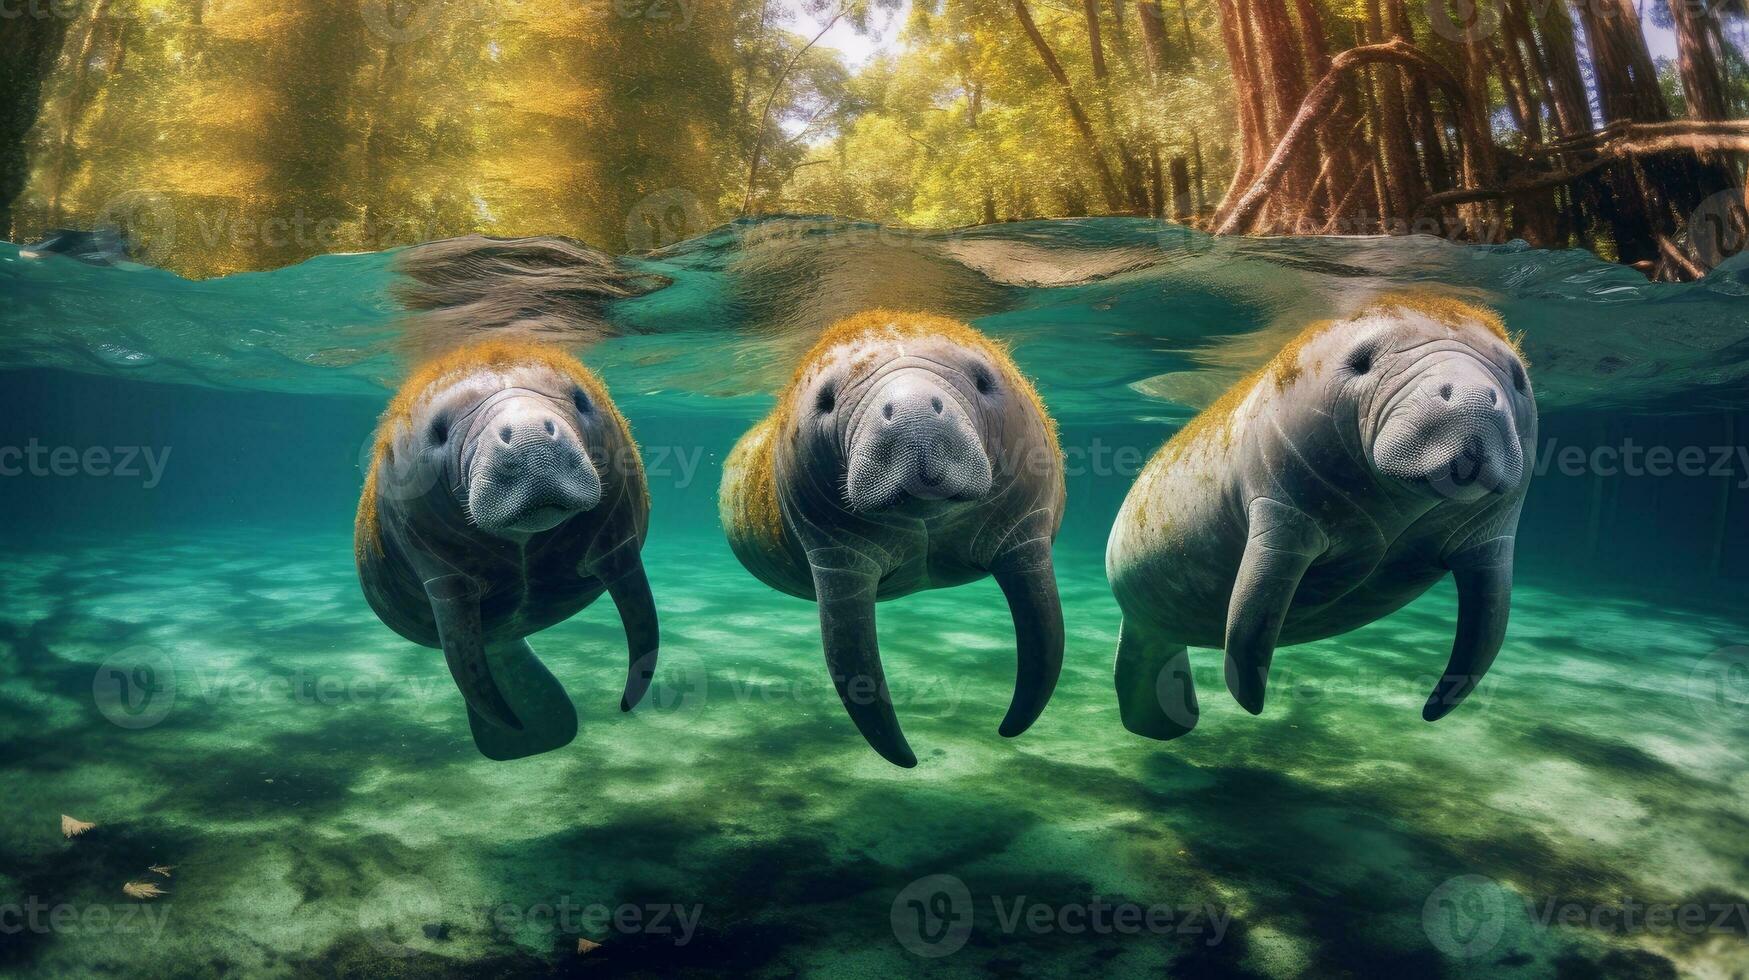 Three manatees swimming in a serene river surrounded by lush trees photo